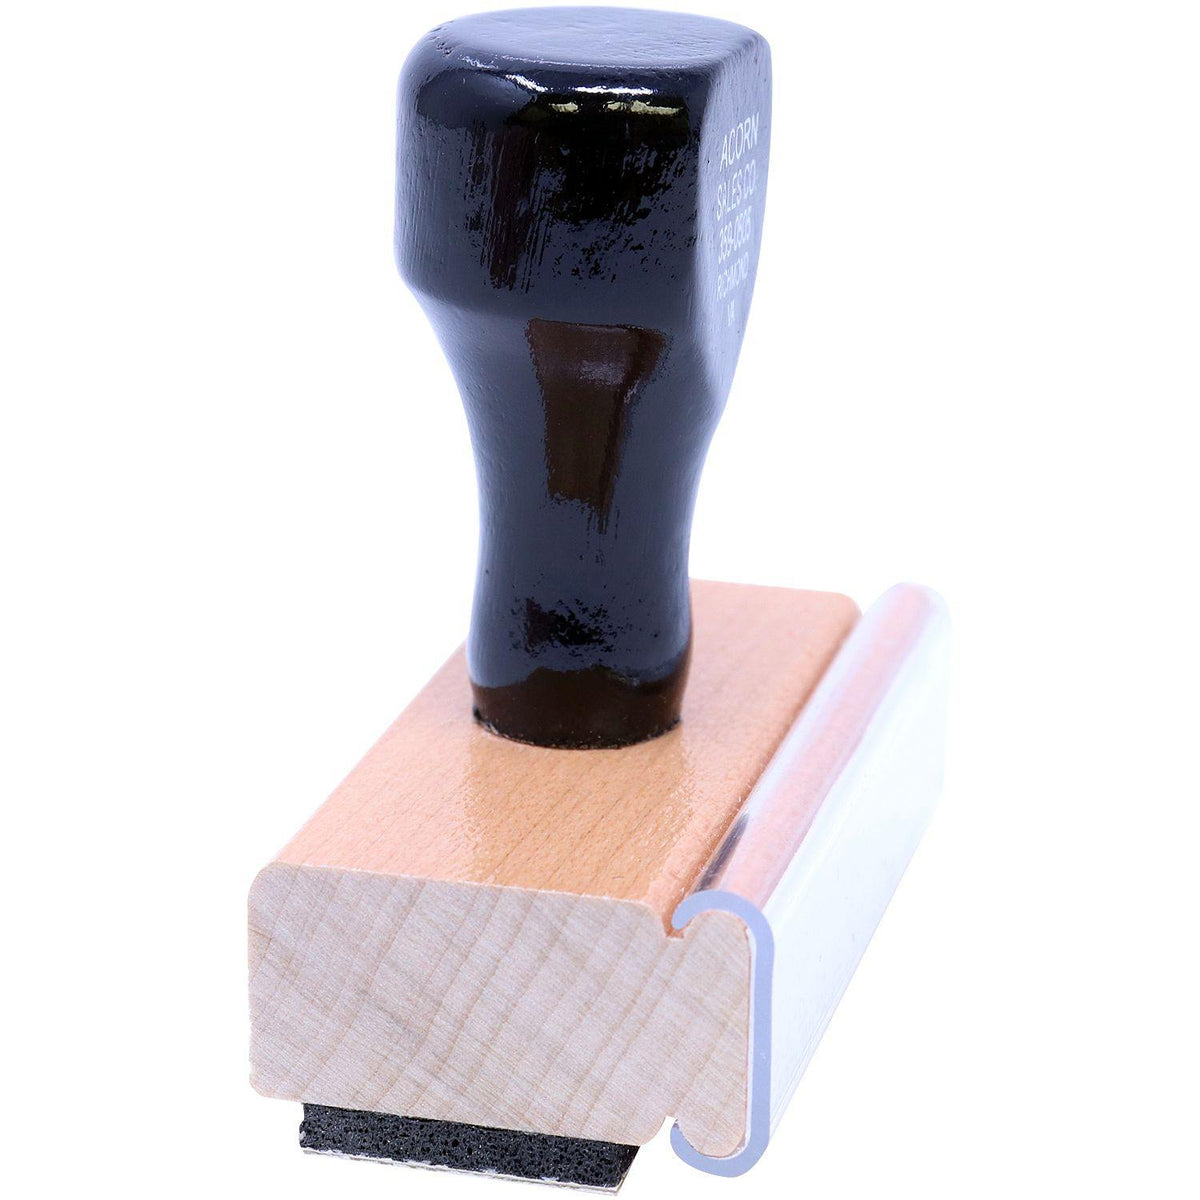 Side View of Attorney-Client Privilege Rubber Stamp at an Angle